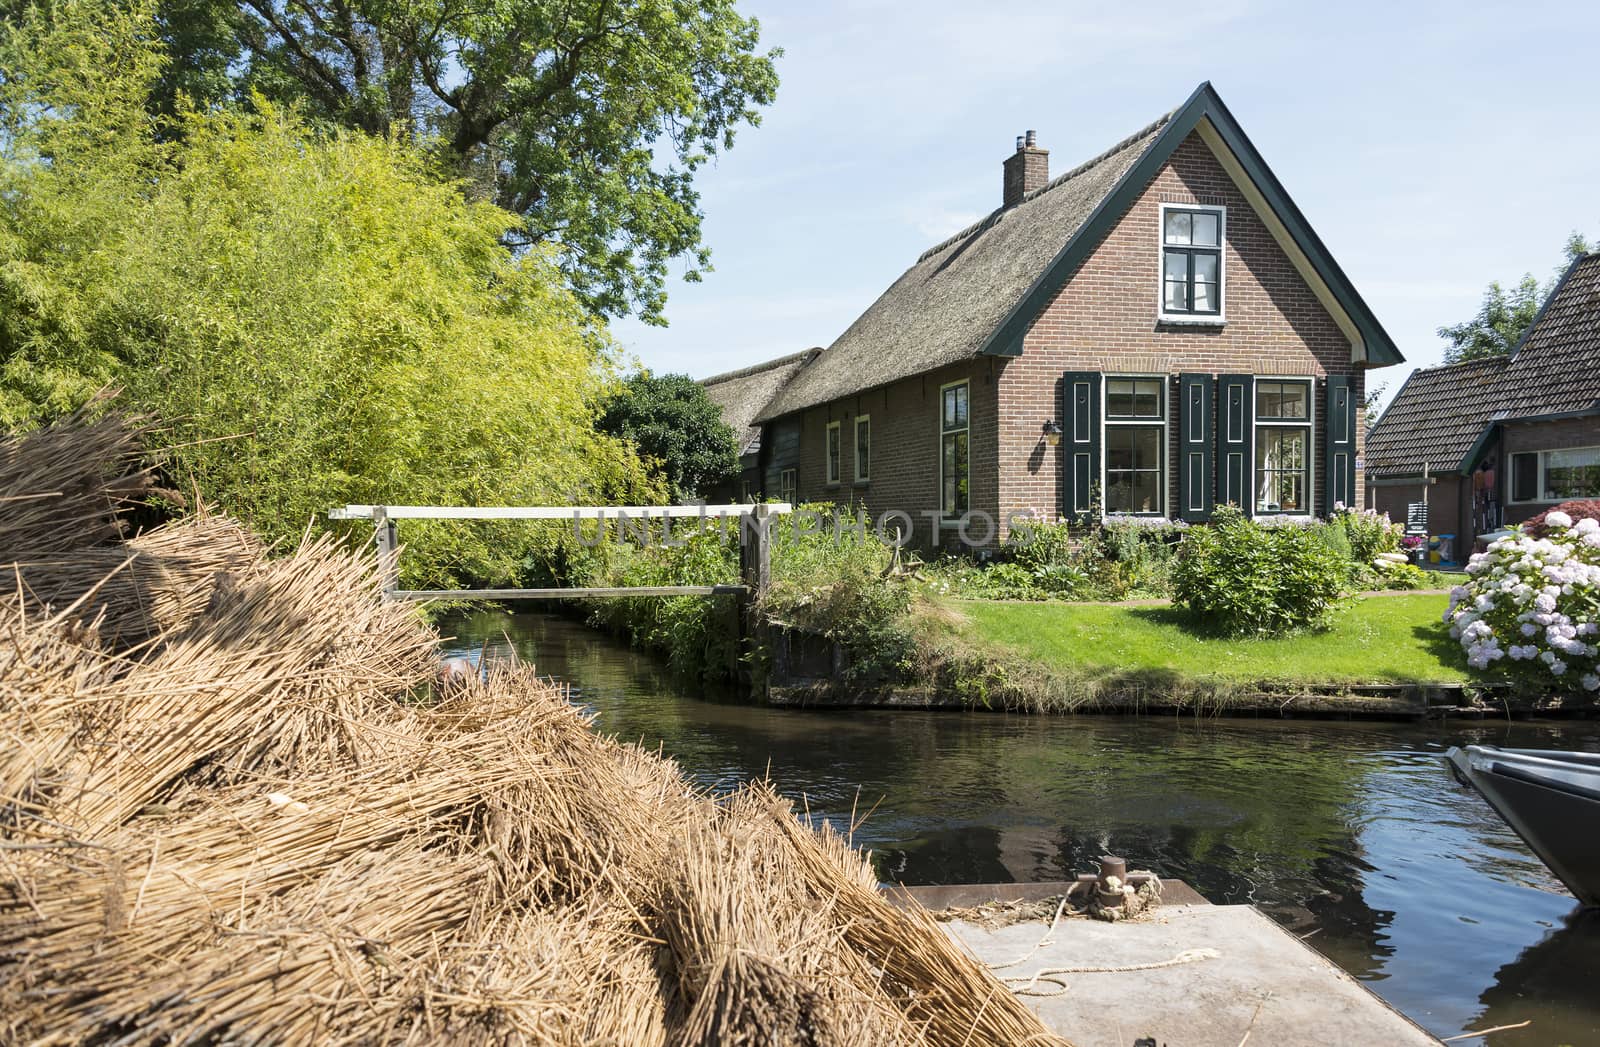 Hay and bales of straw for the roof in the ducth place giethoorn, called the venice of the north